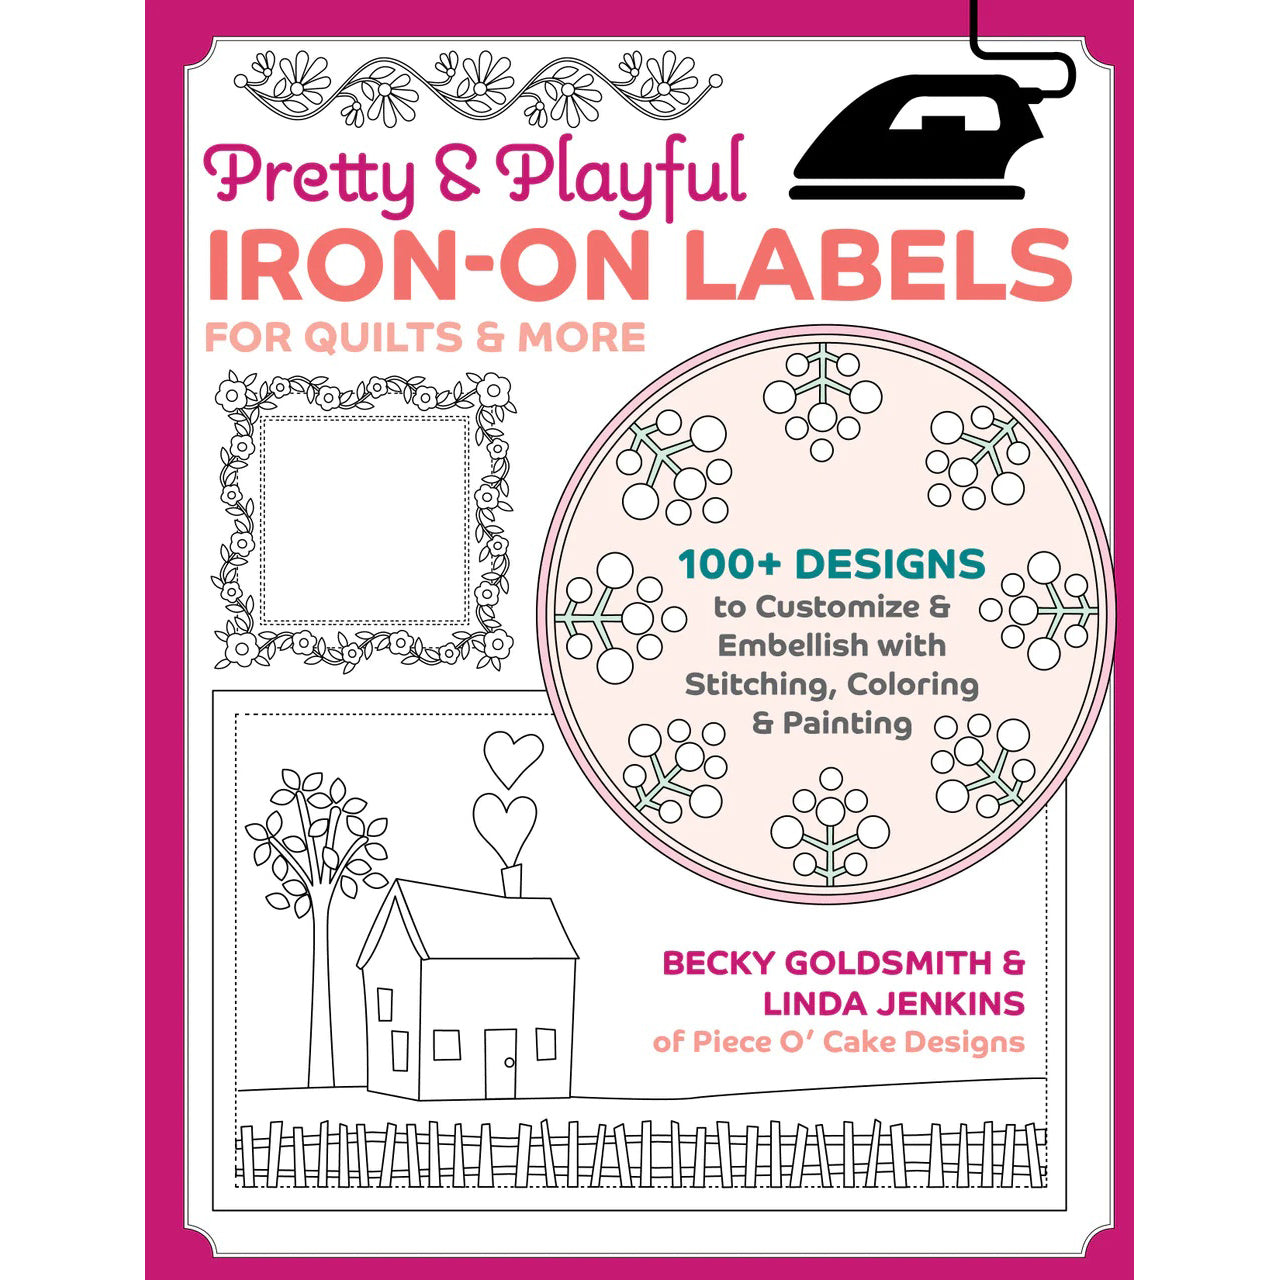 Pretty & Playful Iron-on Labels for Quilts & More